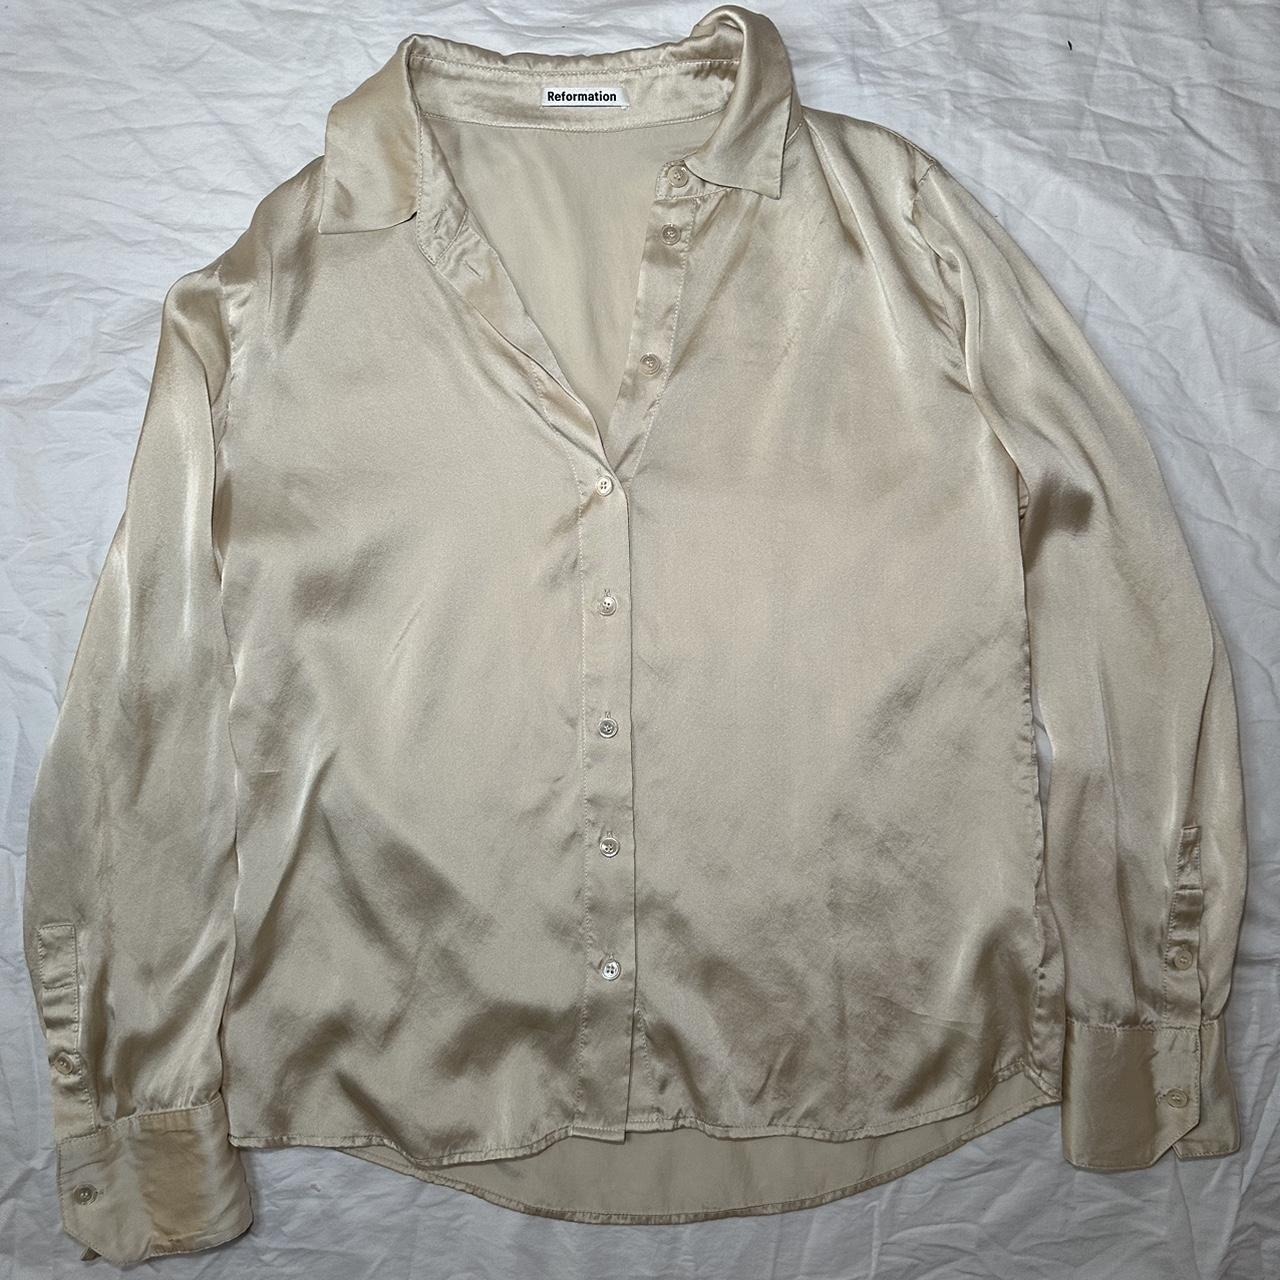 Reformation Women's Cream and Tan Blouse (2)